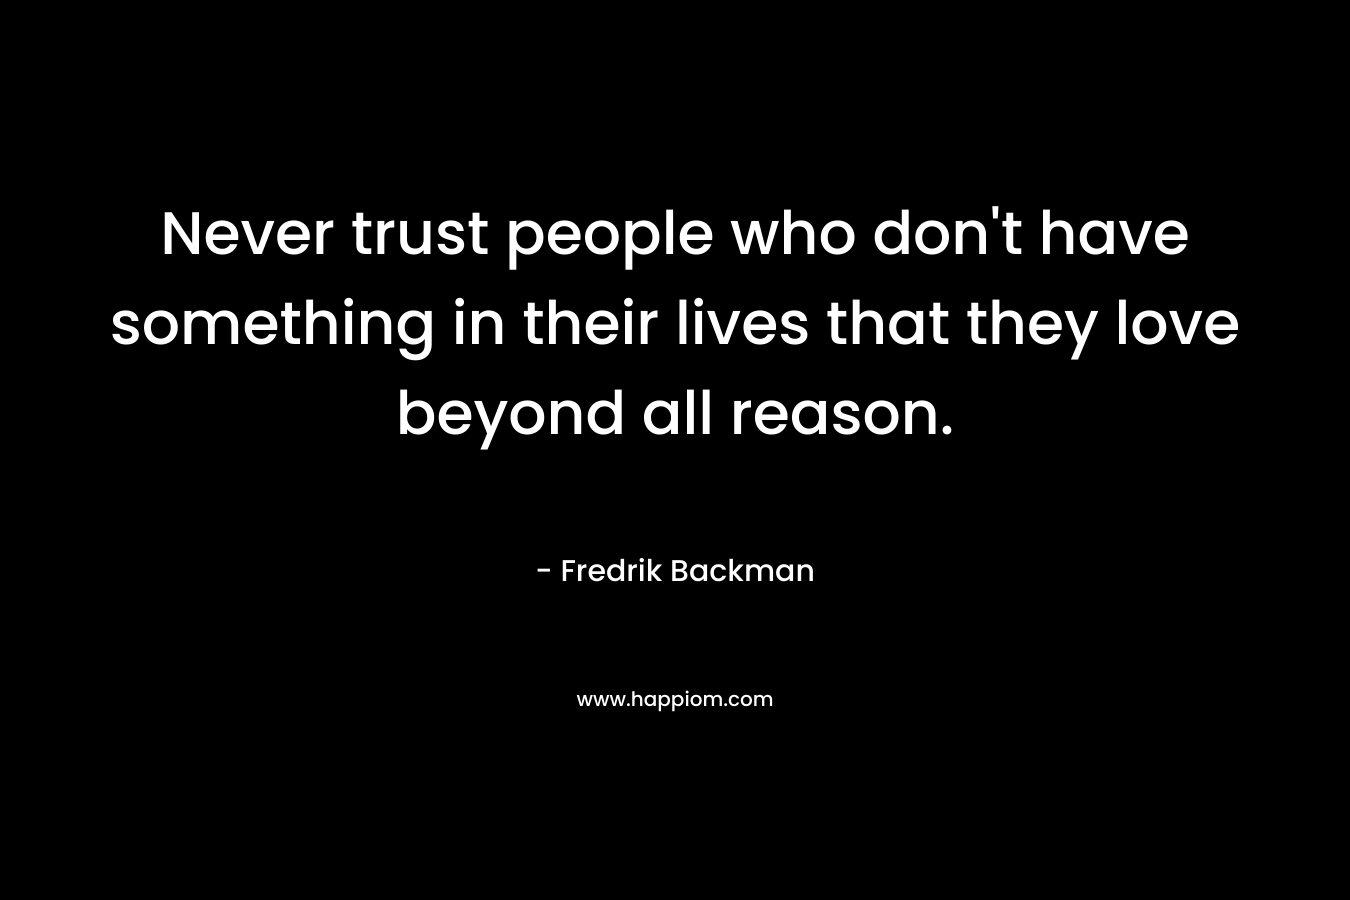 Never trust people who don't have something in their lives that they love beyond all reason.